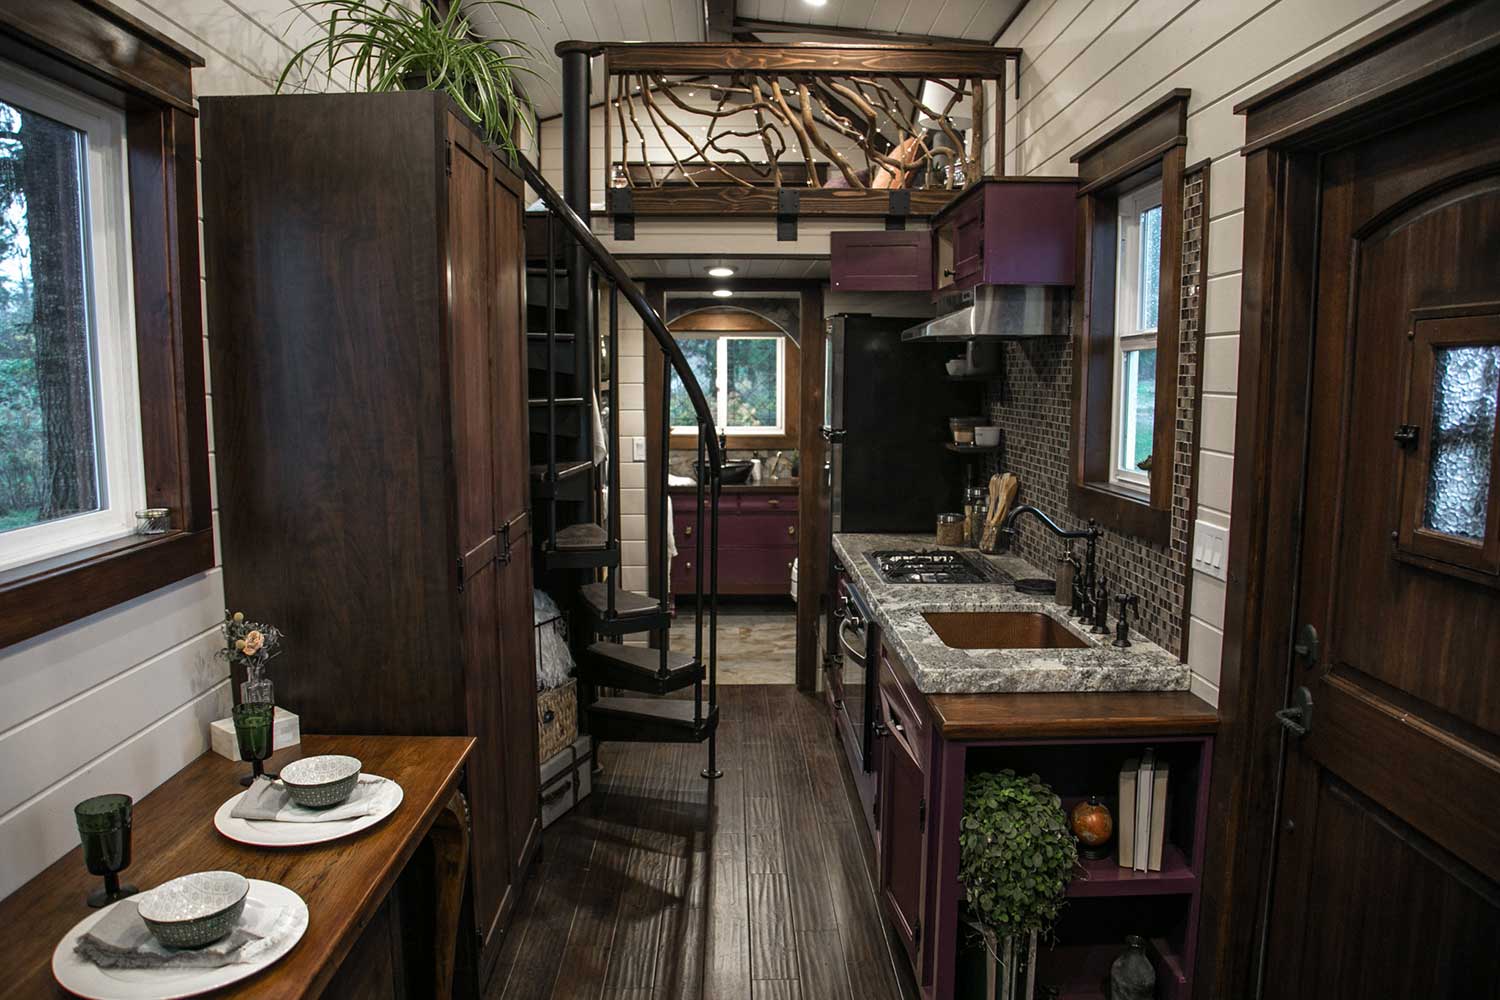 Spiral staircase to loft and custom metalwork in the interior of the Tudor custom tiny house